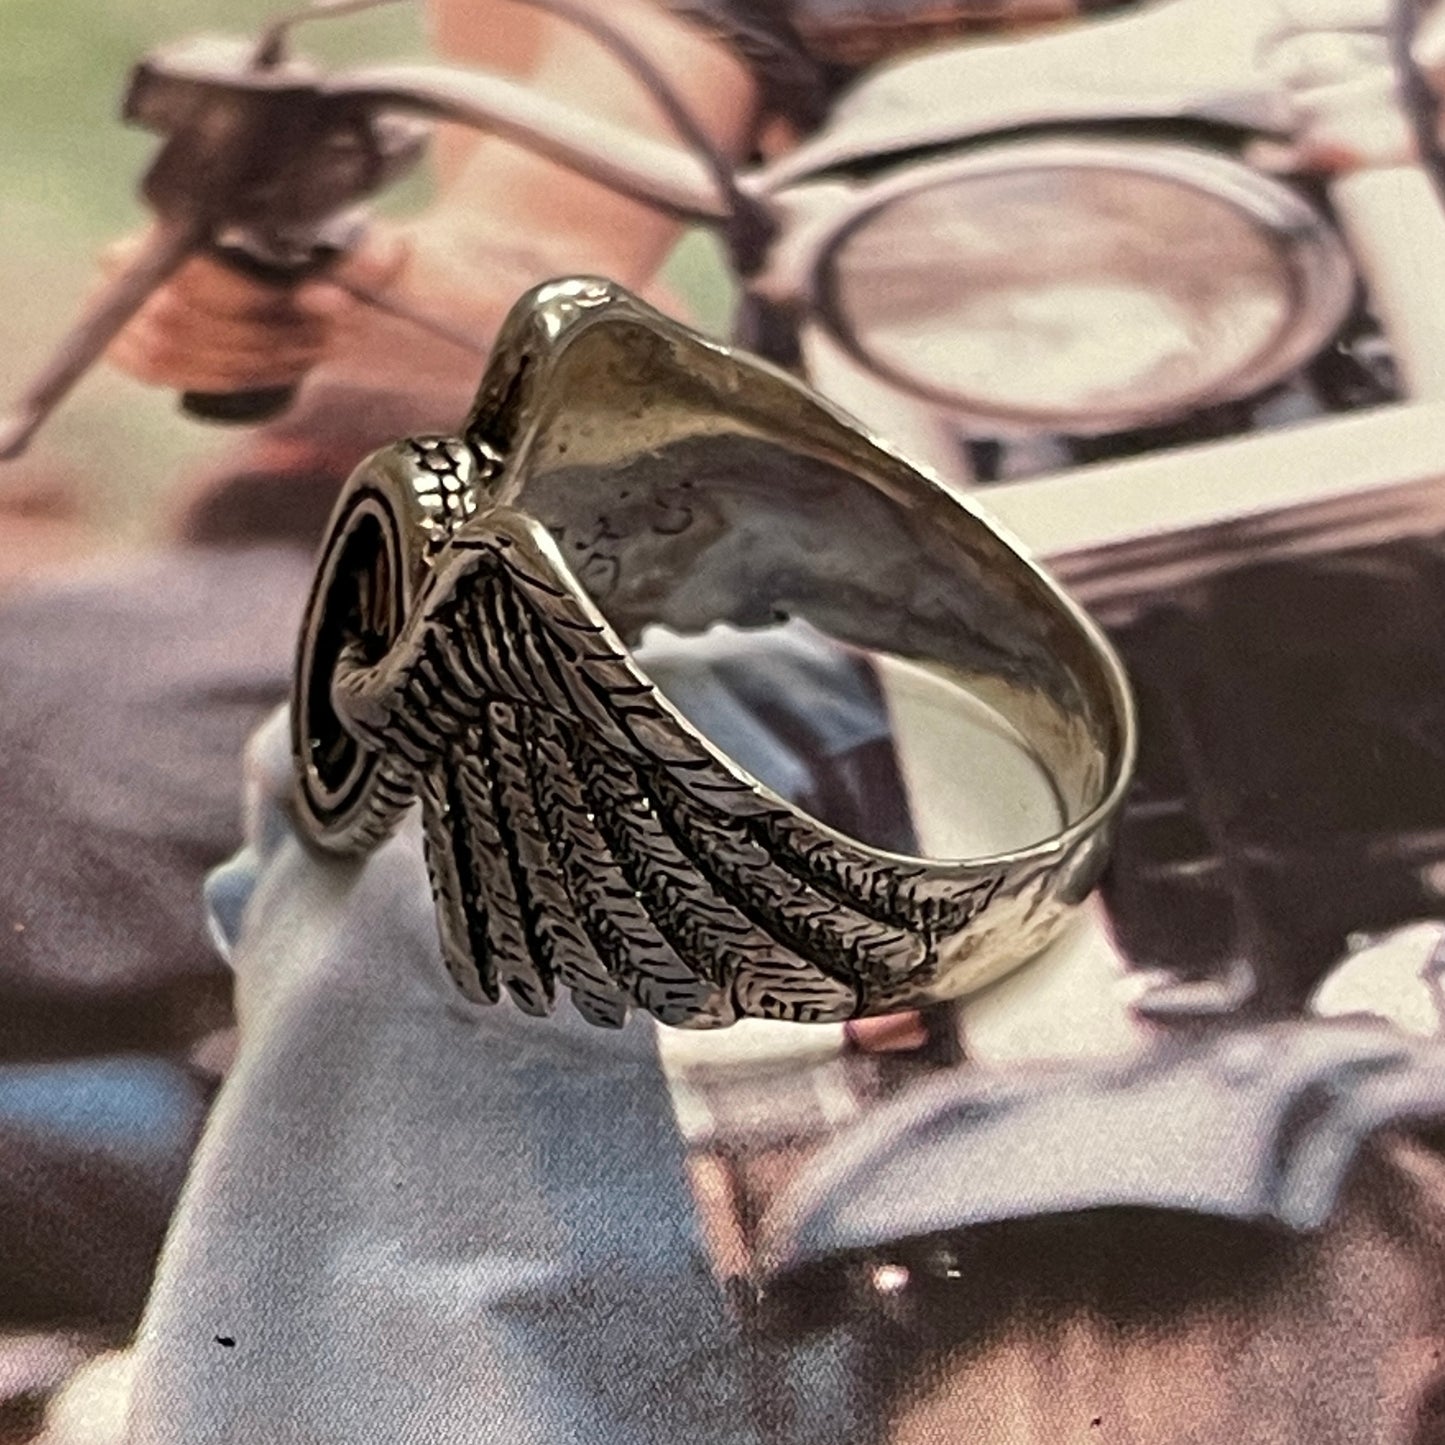 G&S Winged Wheel Ring [Size 11.5]